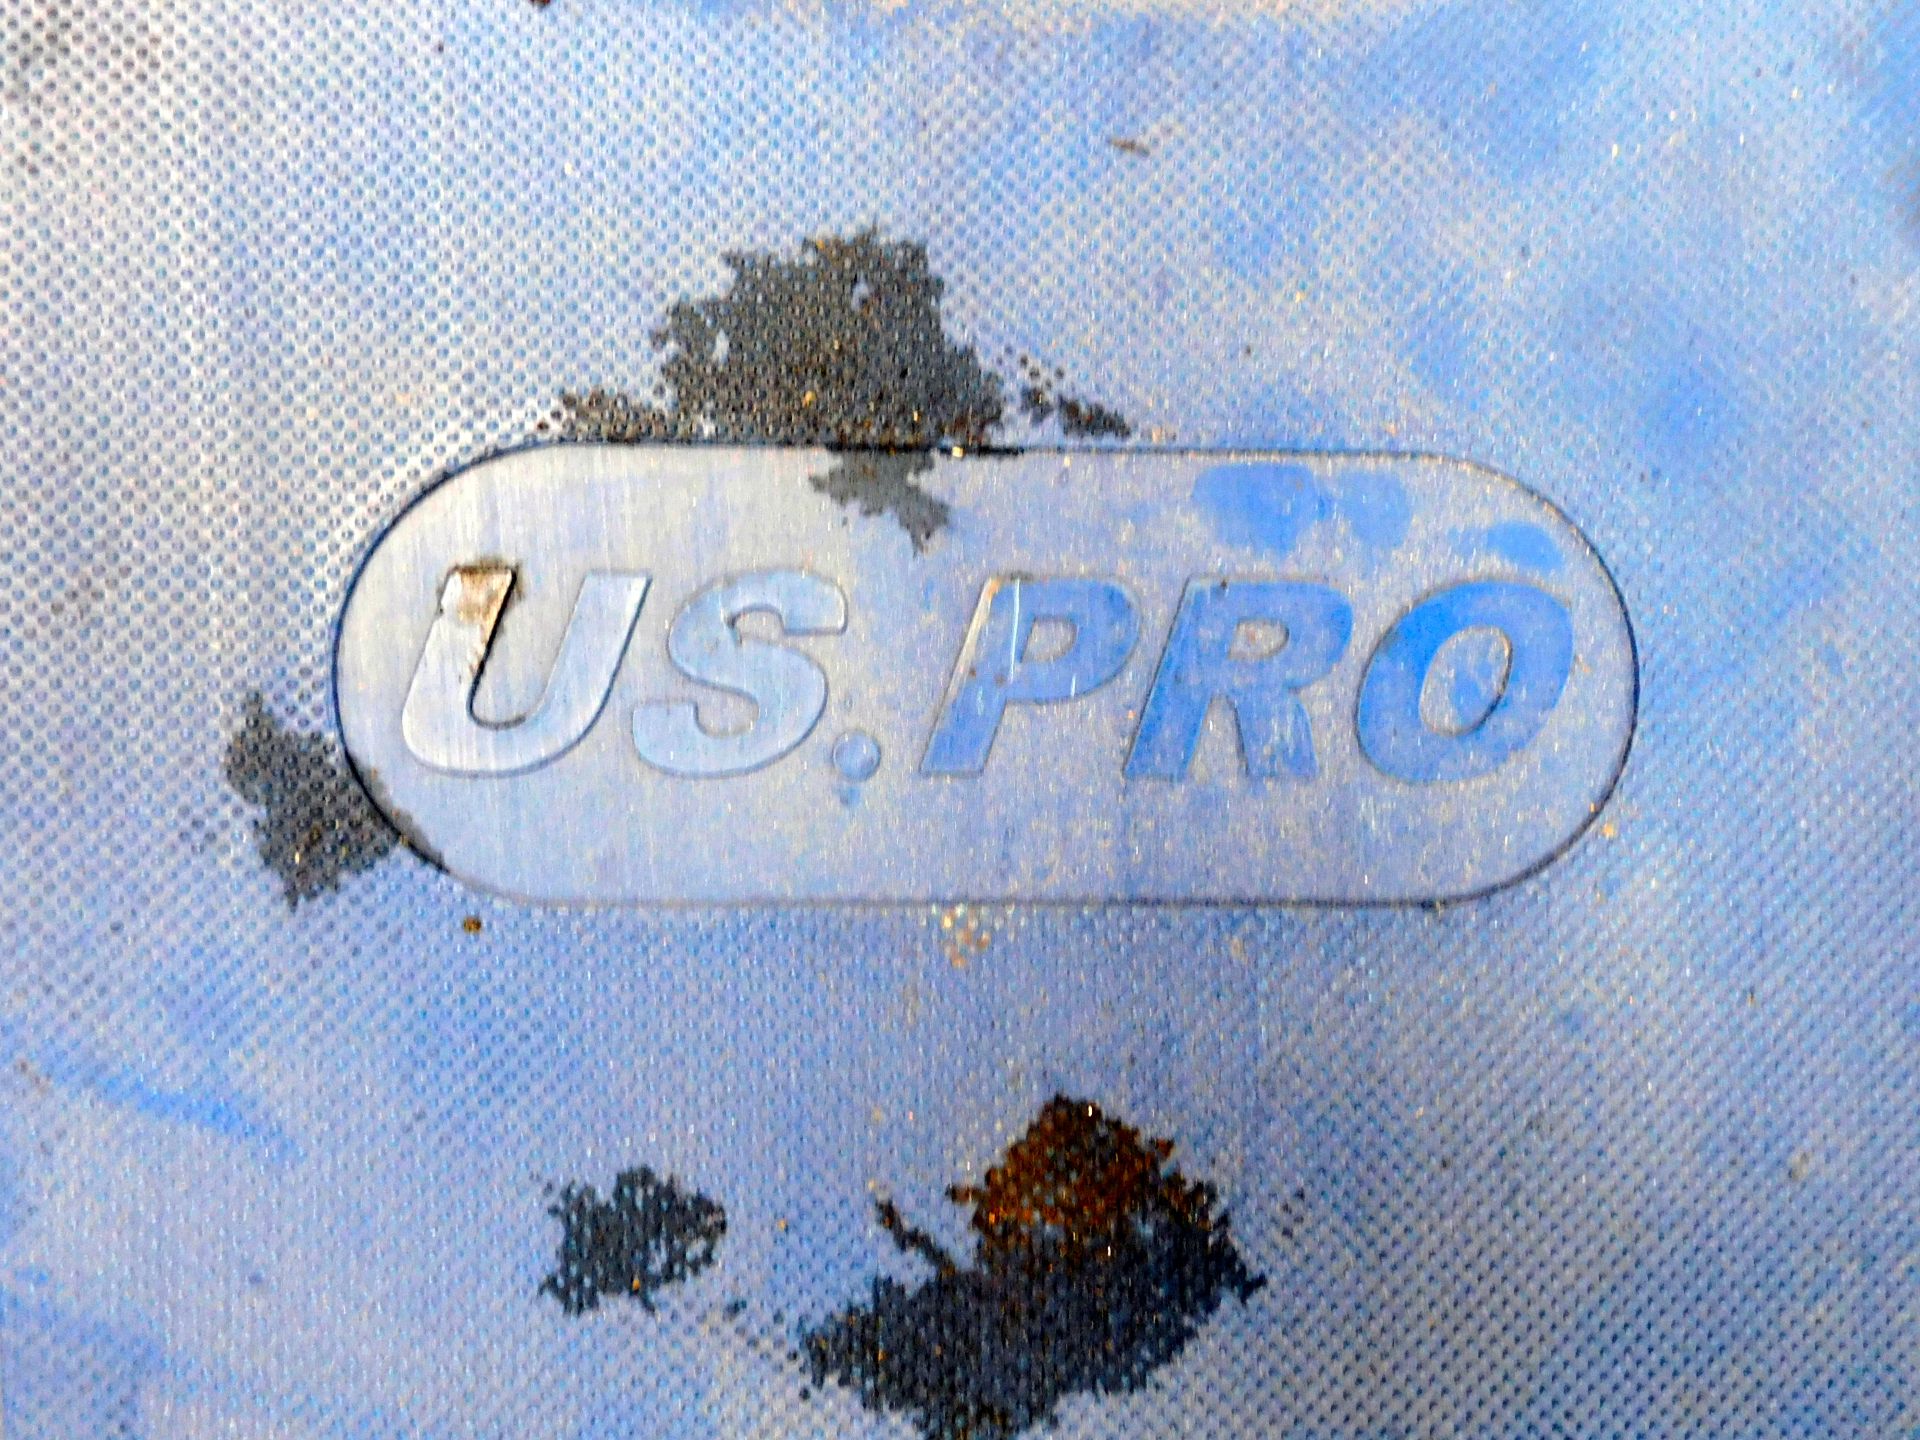 U.S Pro Rubber Oil Hose (Location: Brentwood. Please Refer to General Notes) - Image 2 of 3